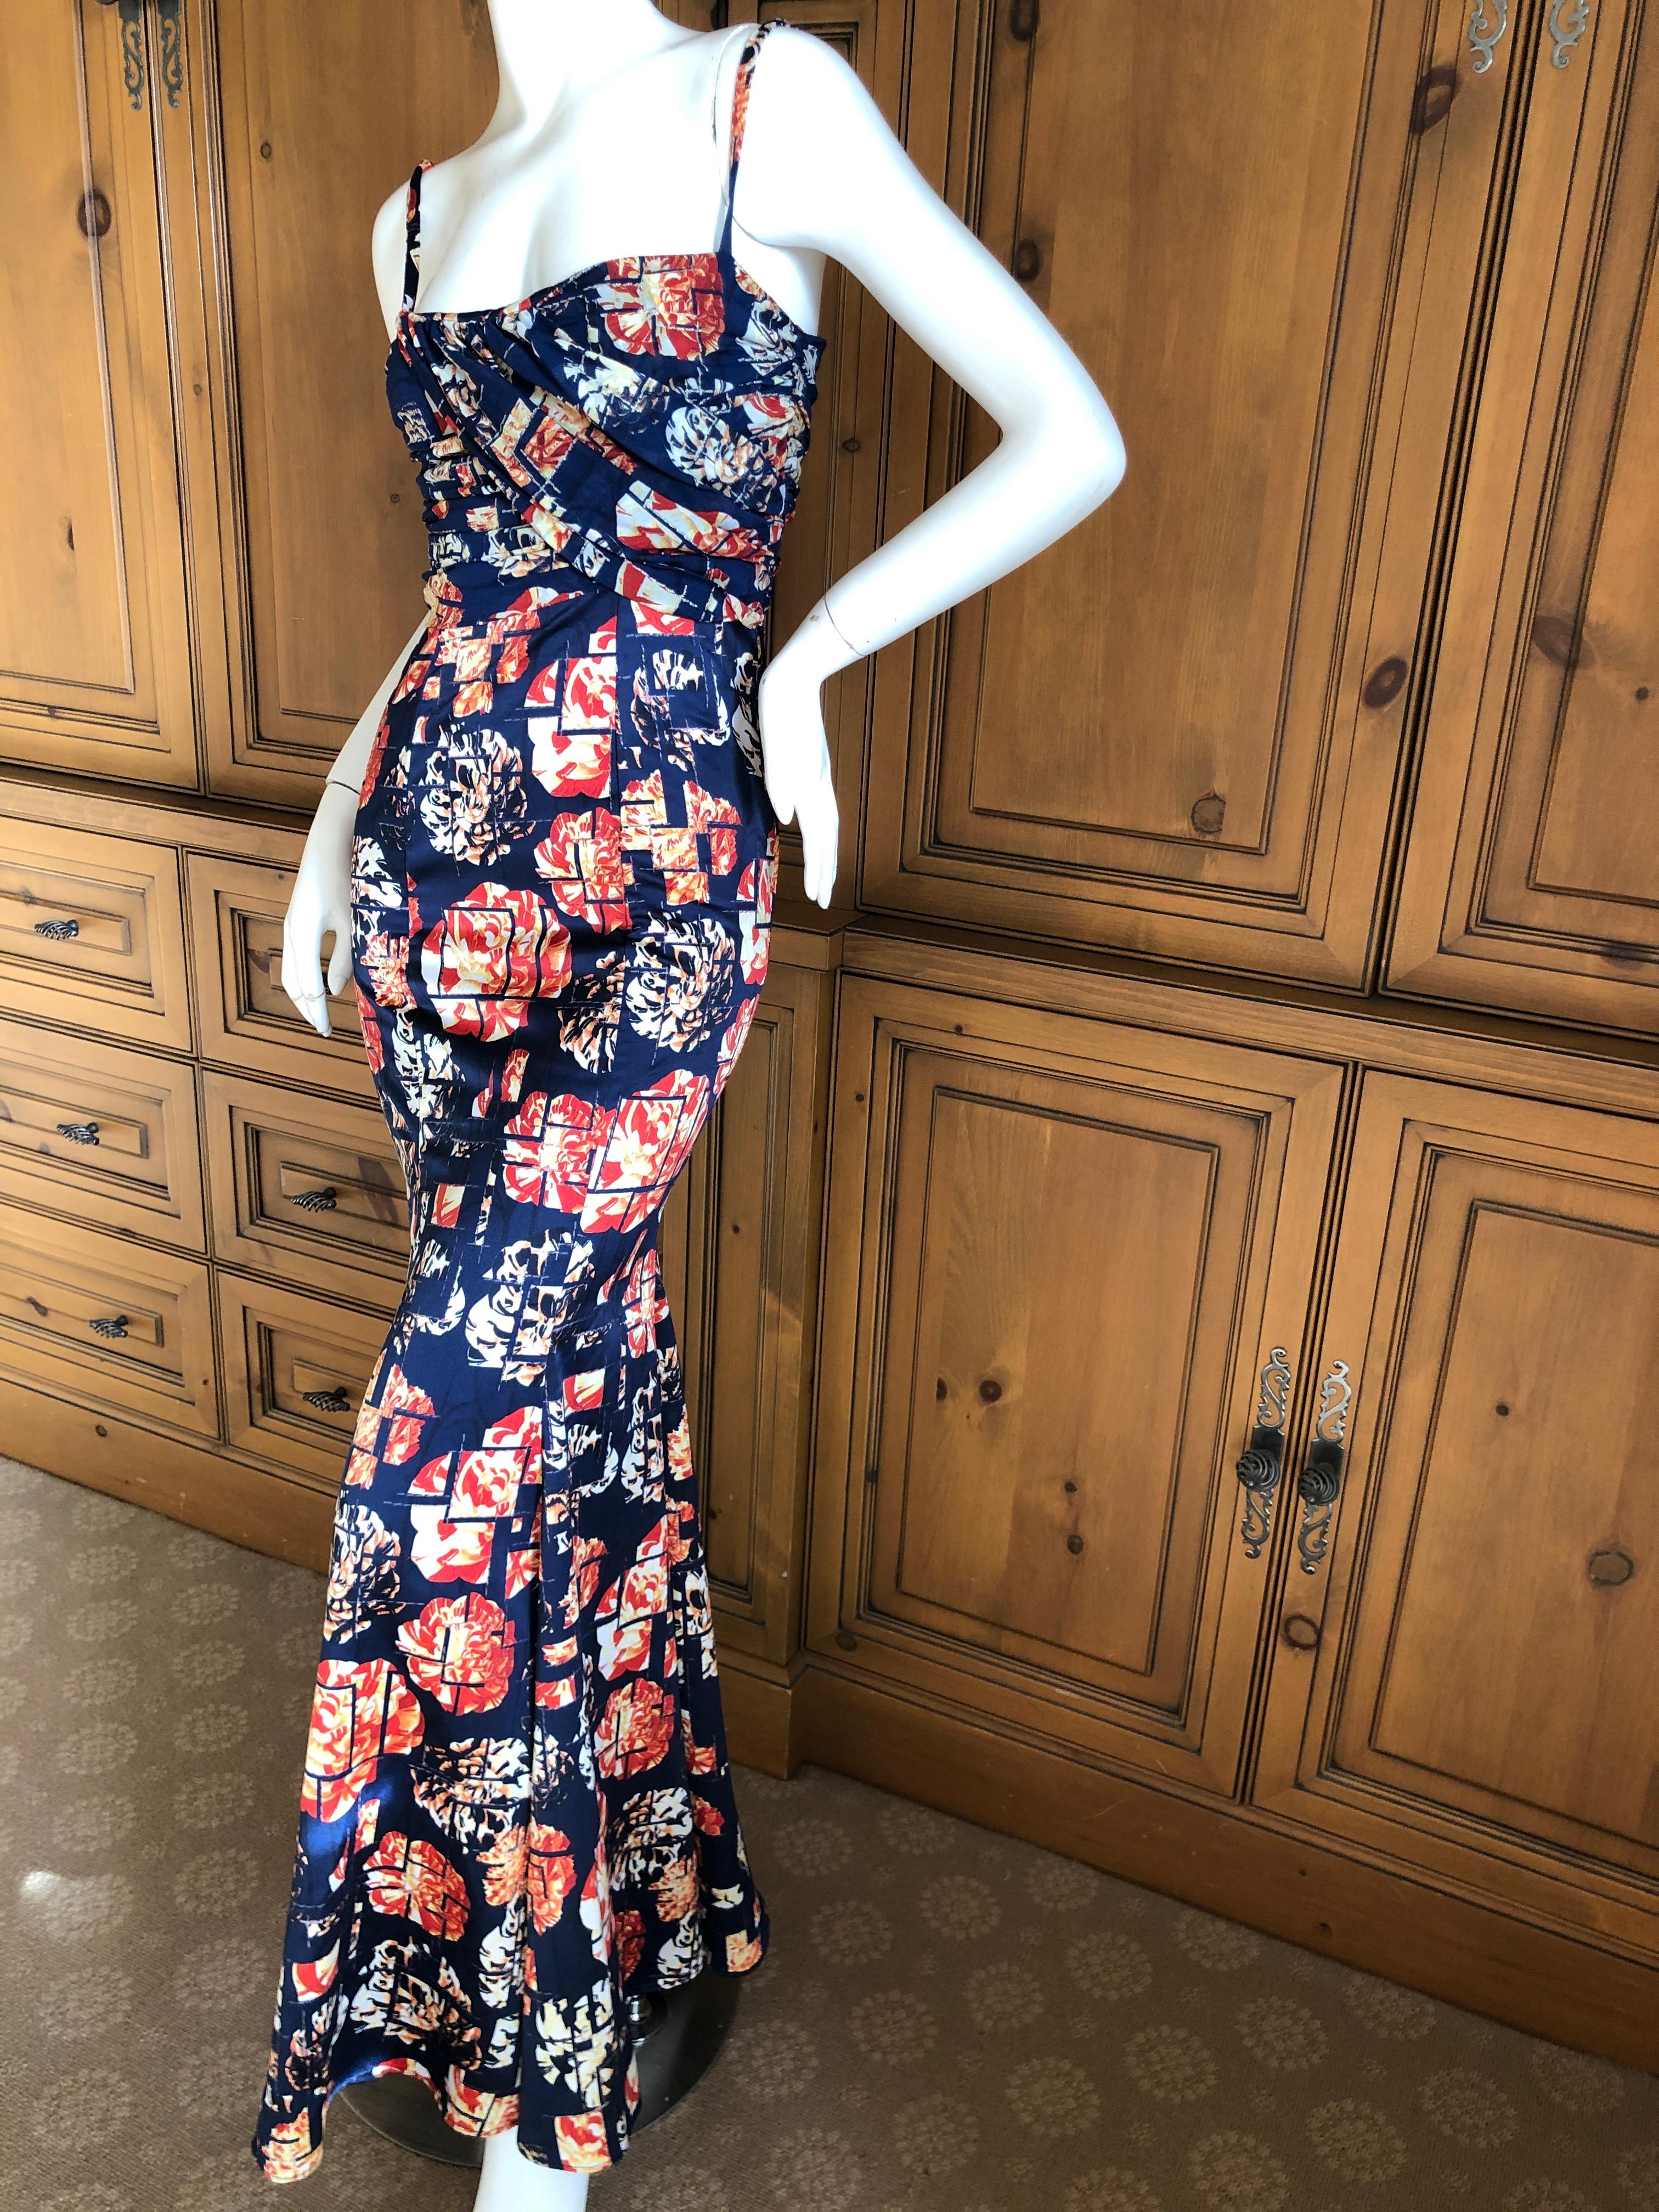 Roberto Cavalli for Just Cavalli  Vintage Floral Evening Dress
Size 40, but runs small.
Bust 34